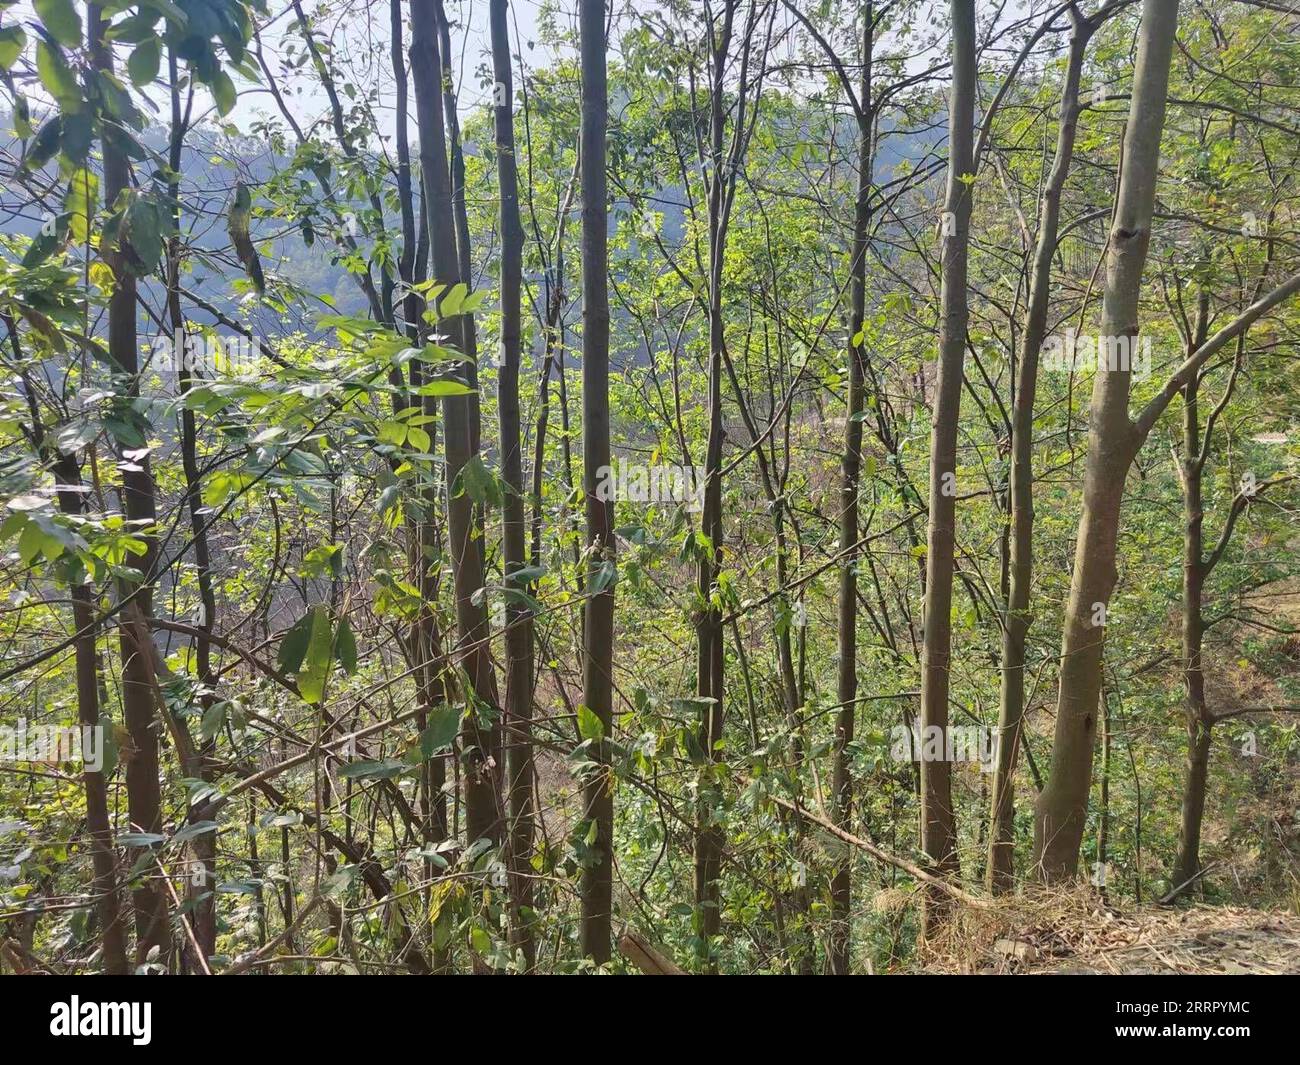 230419 -- GUIYANG, April 19, 2023 -- This undated photo shows the wild Ormosia hosiei trees in the natural forest area of the state-owned forest farm of Nanpanjiang in the Bouyei-Miao Autonomous Prefecture of Qianxinan, southwest China s Guizhou Province. TO GO WITH Nearly 10,000 wild trees of a rare species found in China s Guizhou CHINA-GUIZHOU-WILD ORMOSIA HOSIEI-DISCOVERY CN ZhengxMinghong PUBLICATIONxNOTxINxCHN Stock Photo